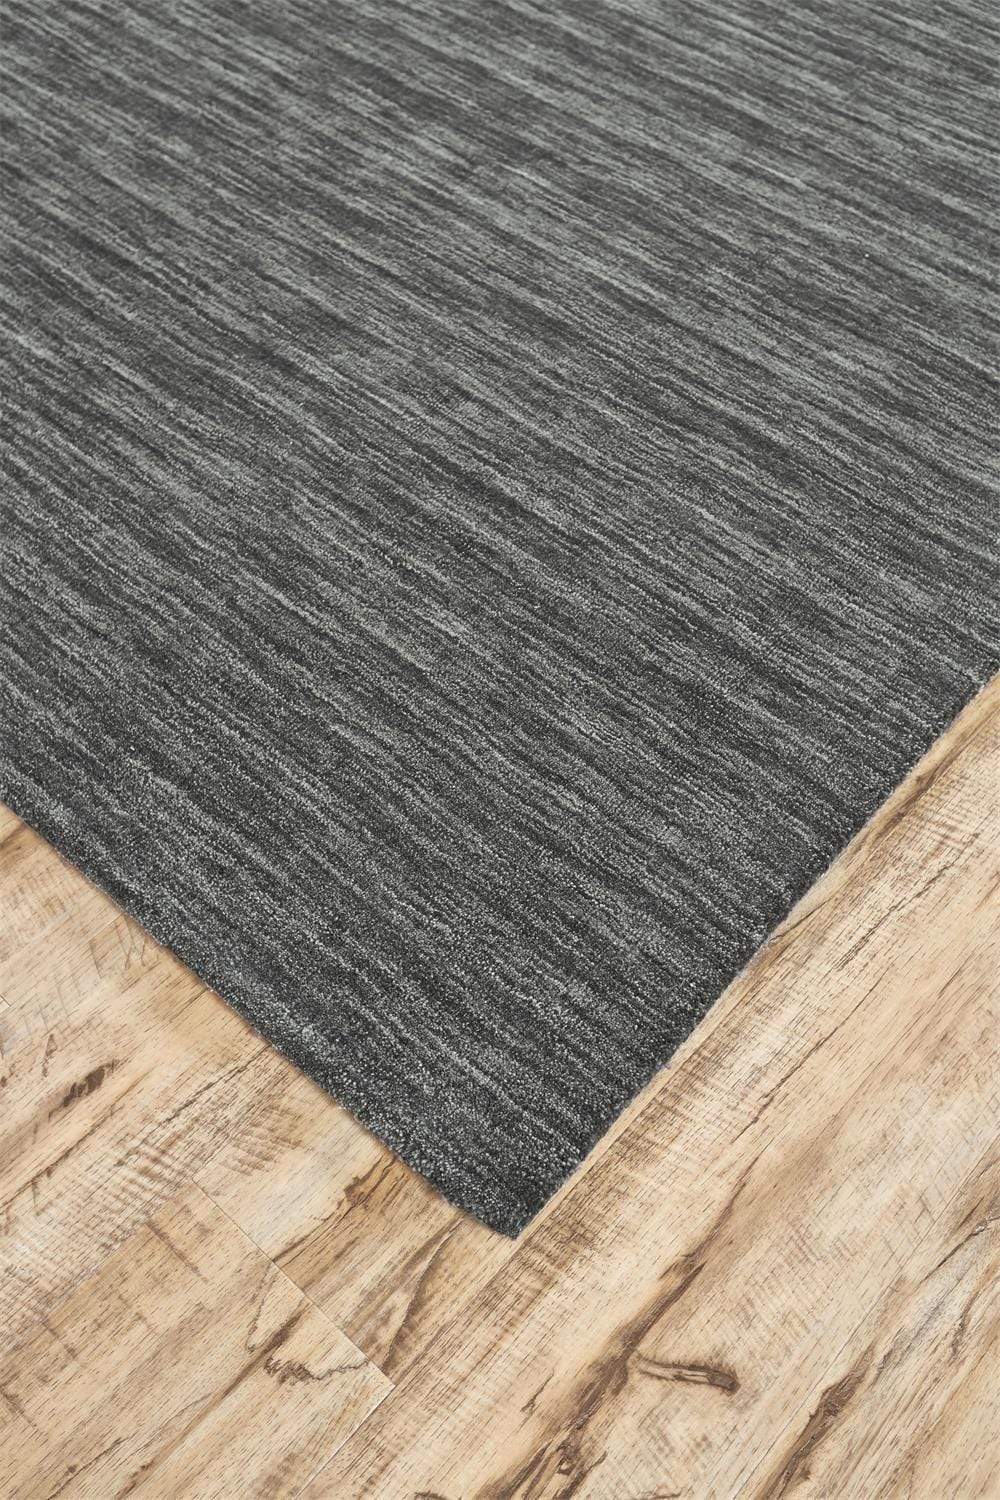 Feizy Feizy Home Luna Rug - Charcoal